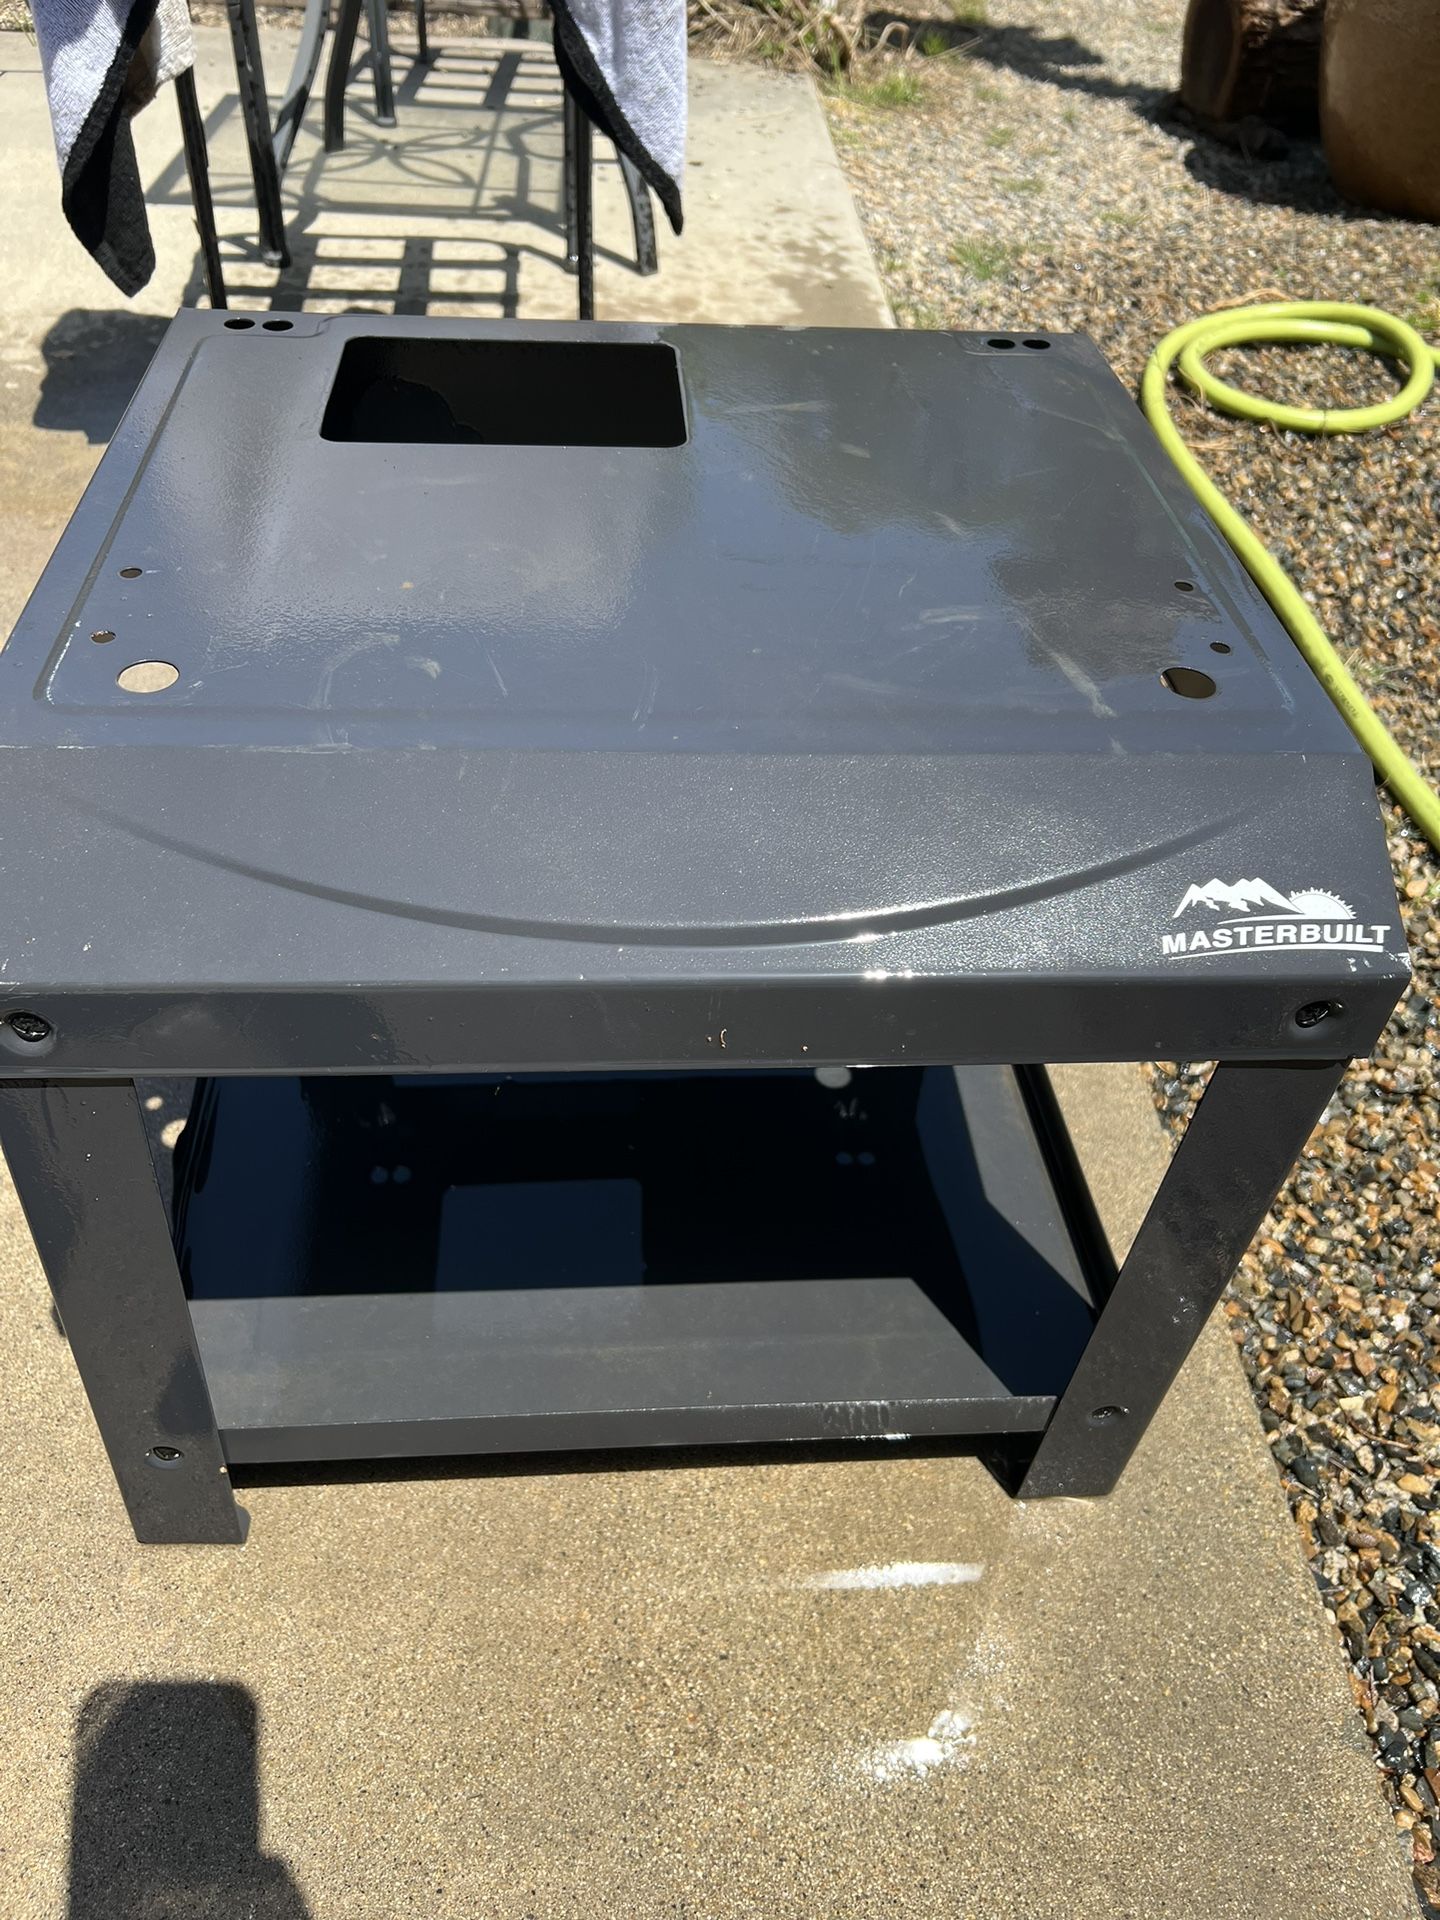 Masterbuilt Smoker Stand  Masterbuilt smoker, Smoker stand, Electric smoker